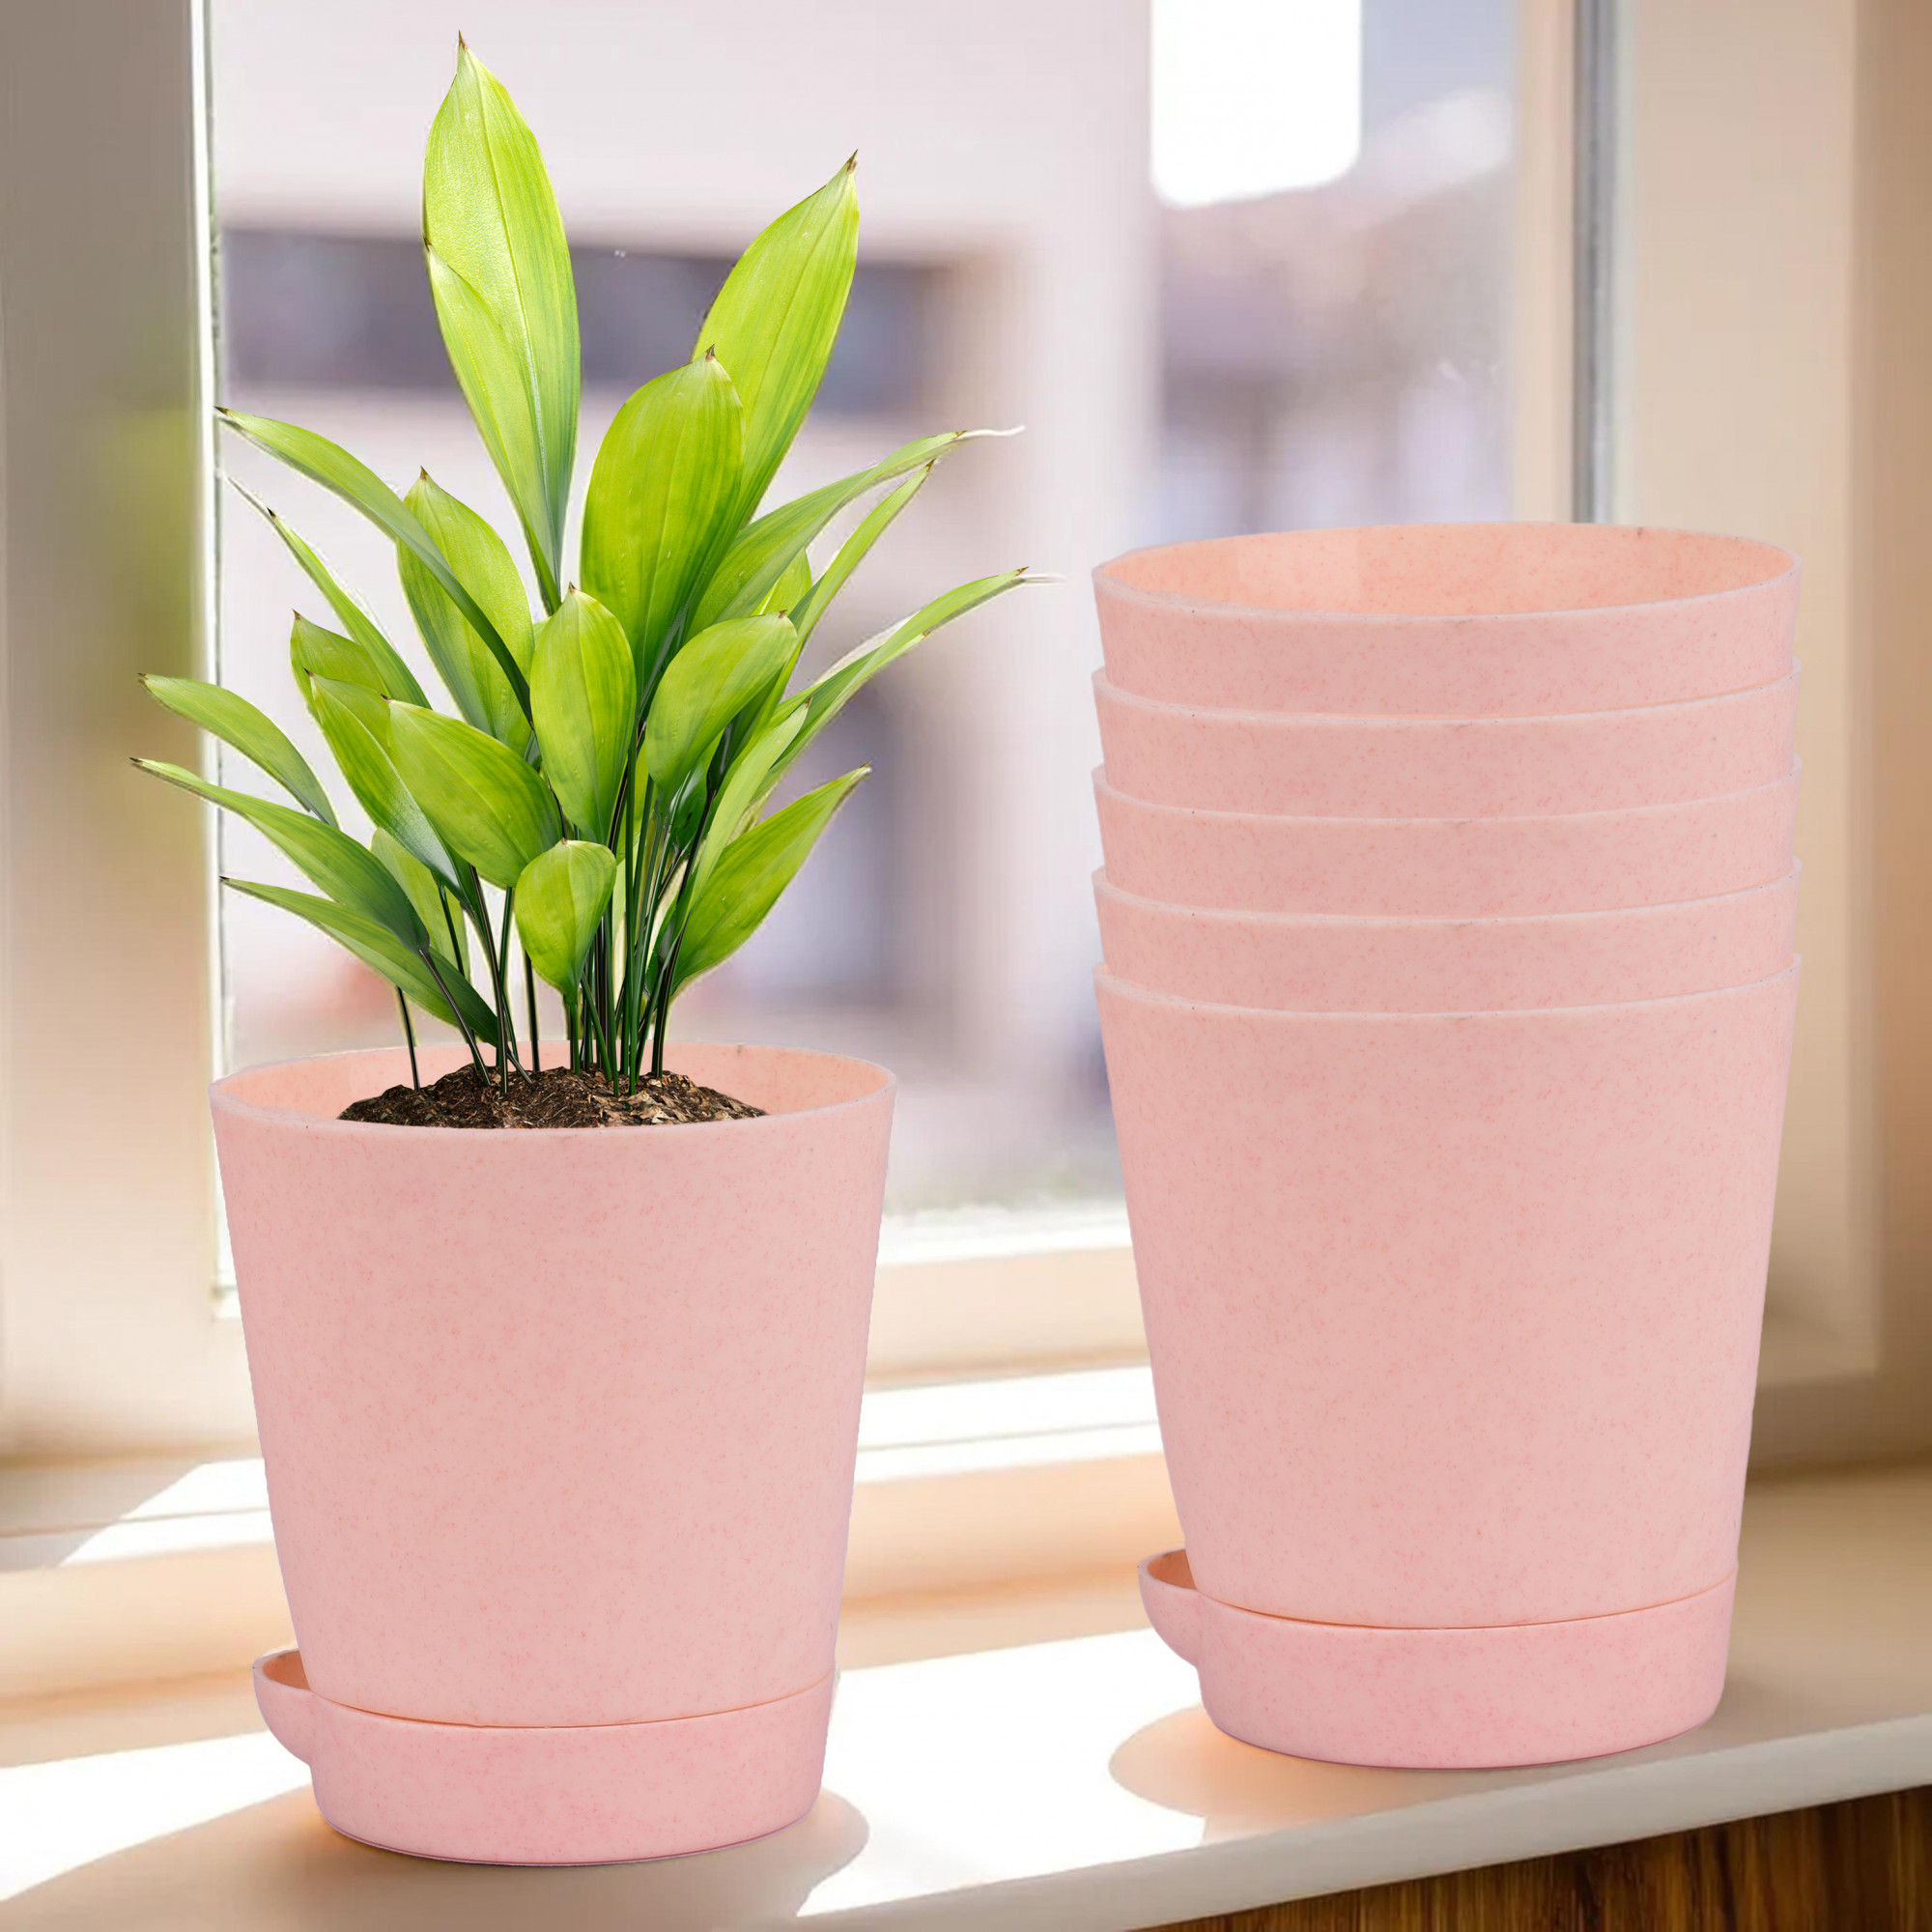 Kuber Industries Flower Pot | Flower Pot for Living Room-Office | Flower Planters for Home-office-Lawns & Garden Décor | Self Watering Flower Planters Pots | Marble Titan | 4 Inch | Peach